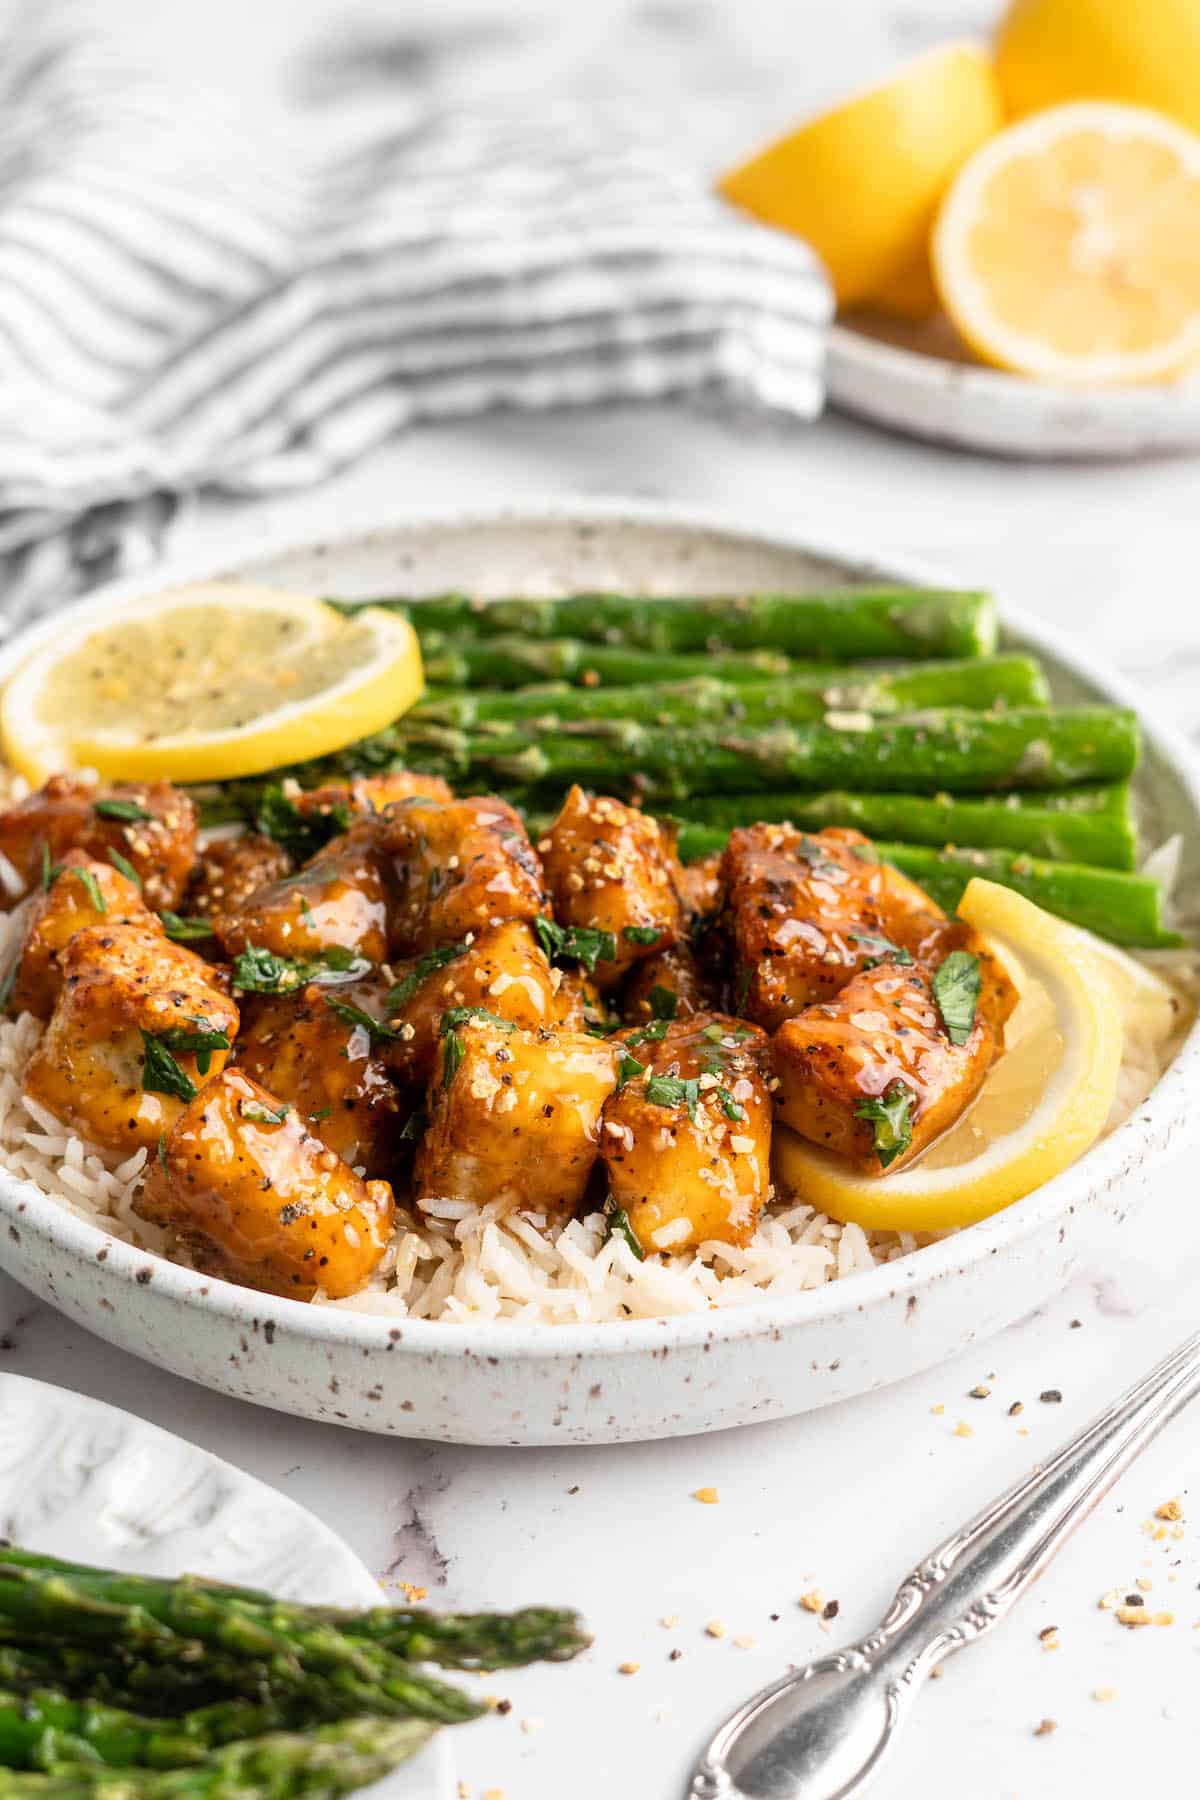 Plate of lemon pepper tofu with rice and asparagus